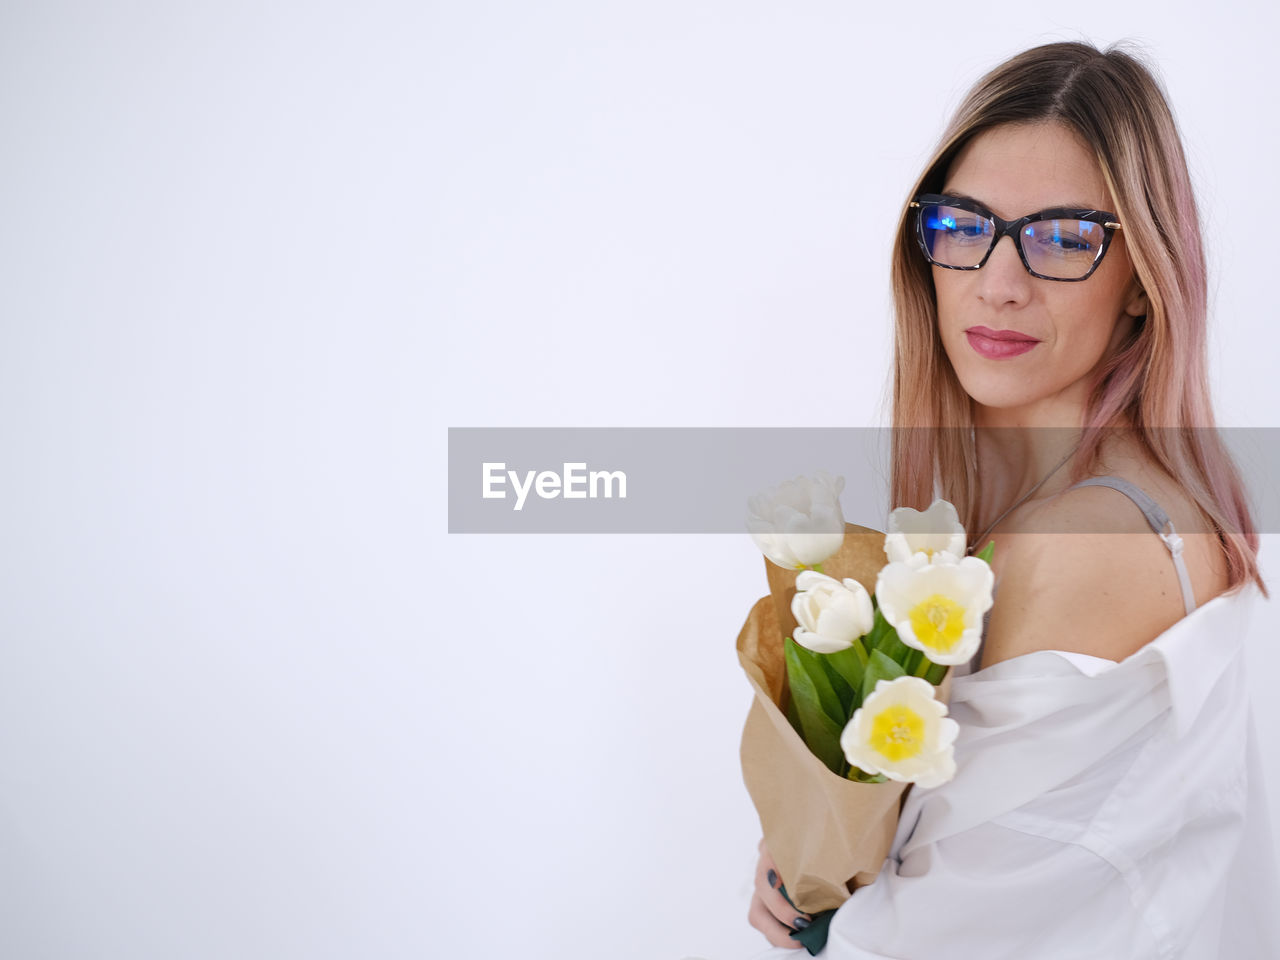 Woman in white shirt holding a bouquet of white tulips on a white background.